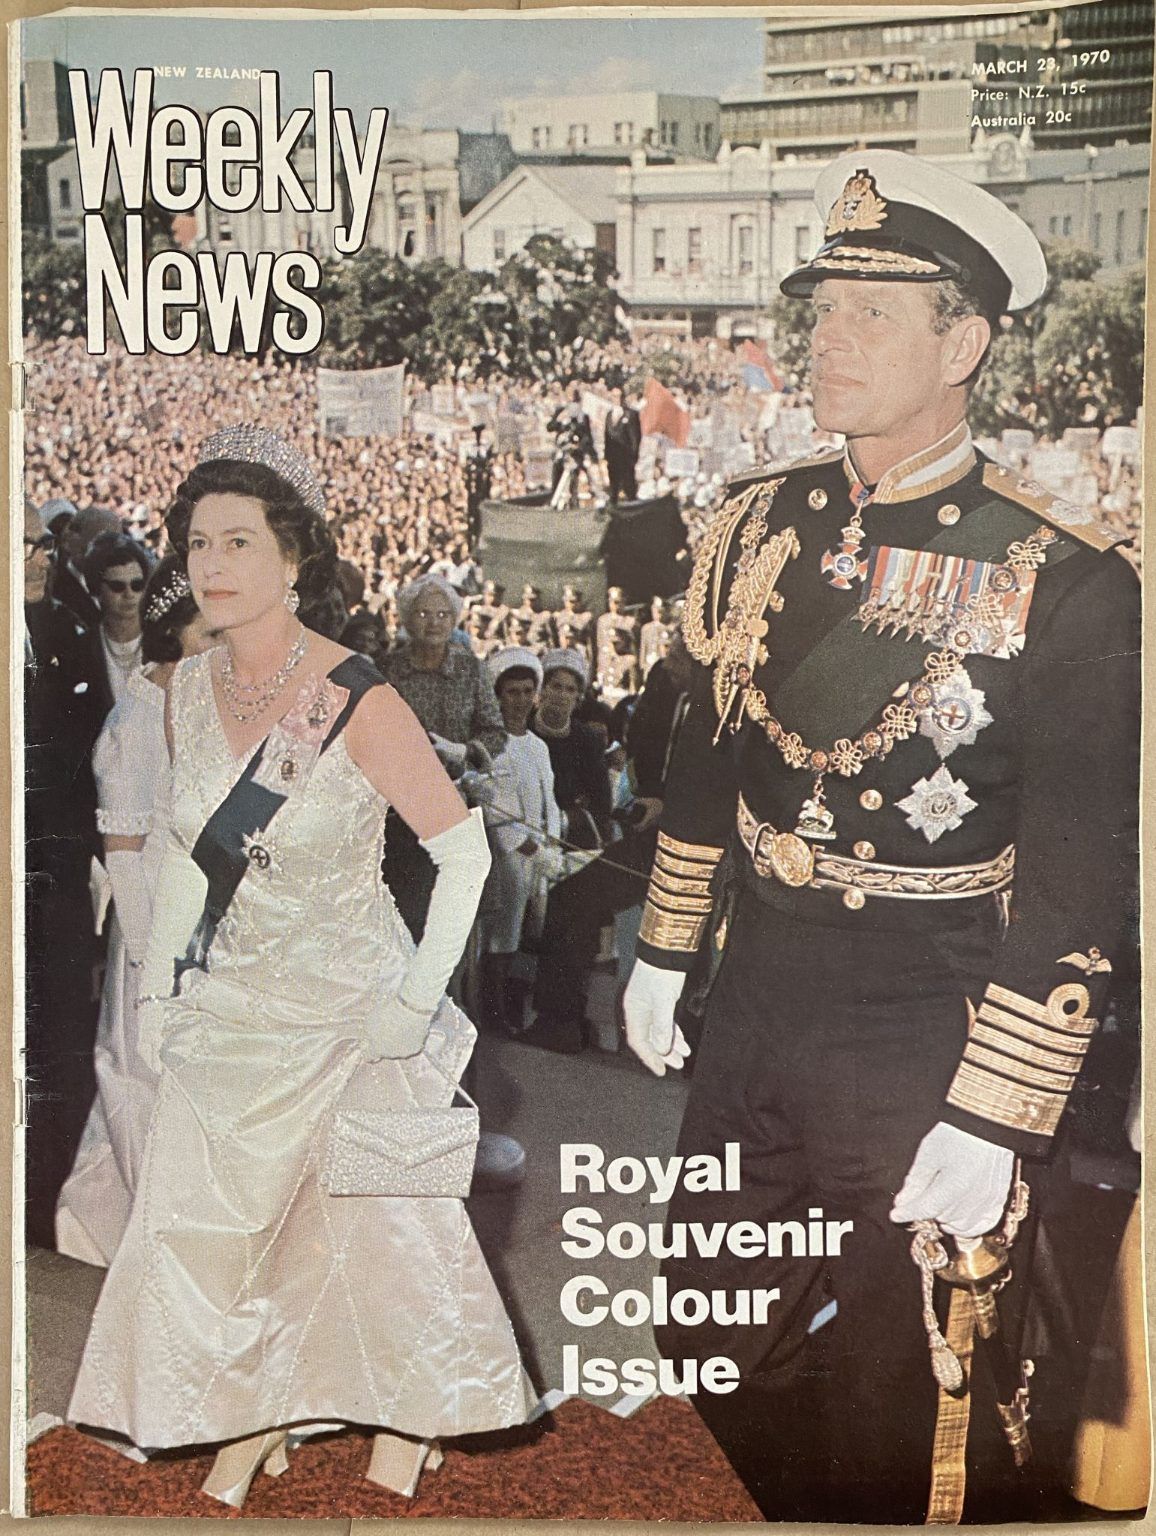 OLD NEWSPAPER: New Zealand Weekly News, No. 5546, 23 March 1970